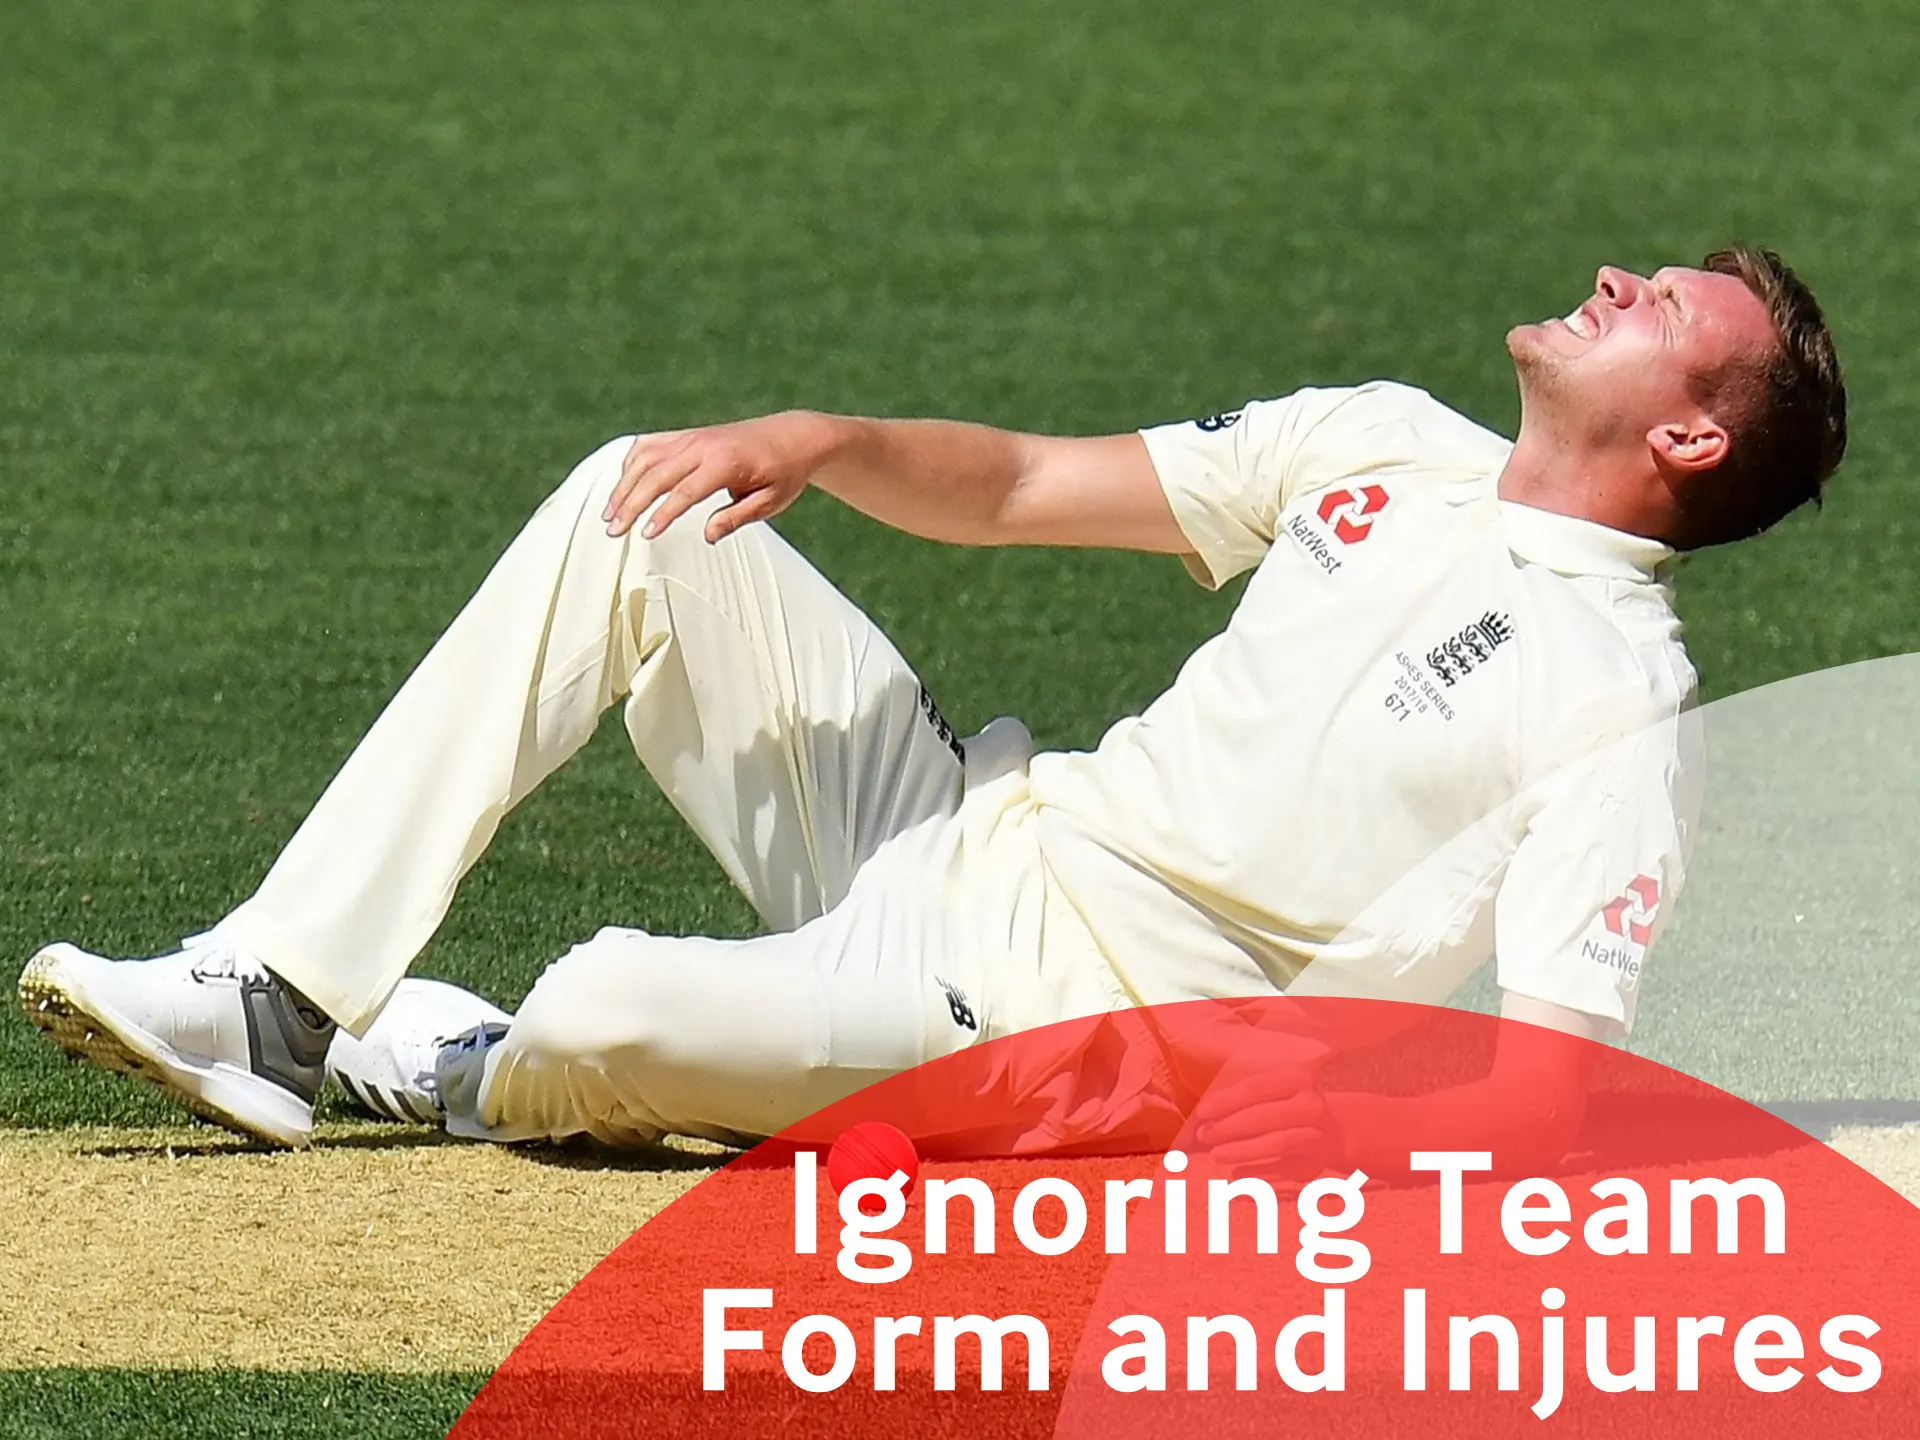 Learn more about form of teams and injures of players.